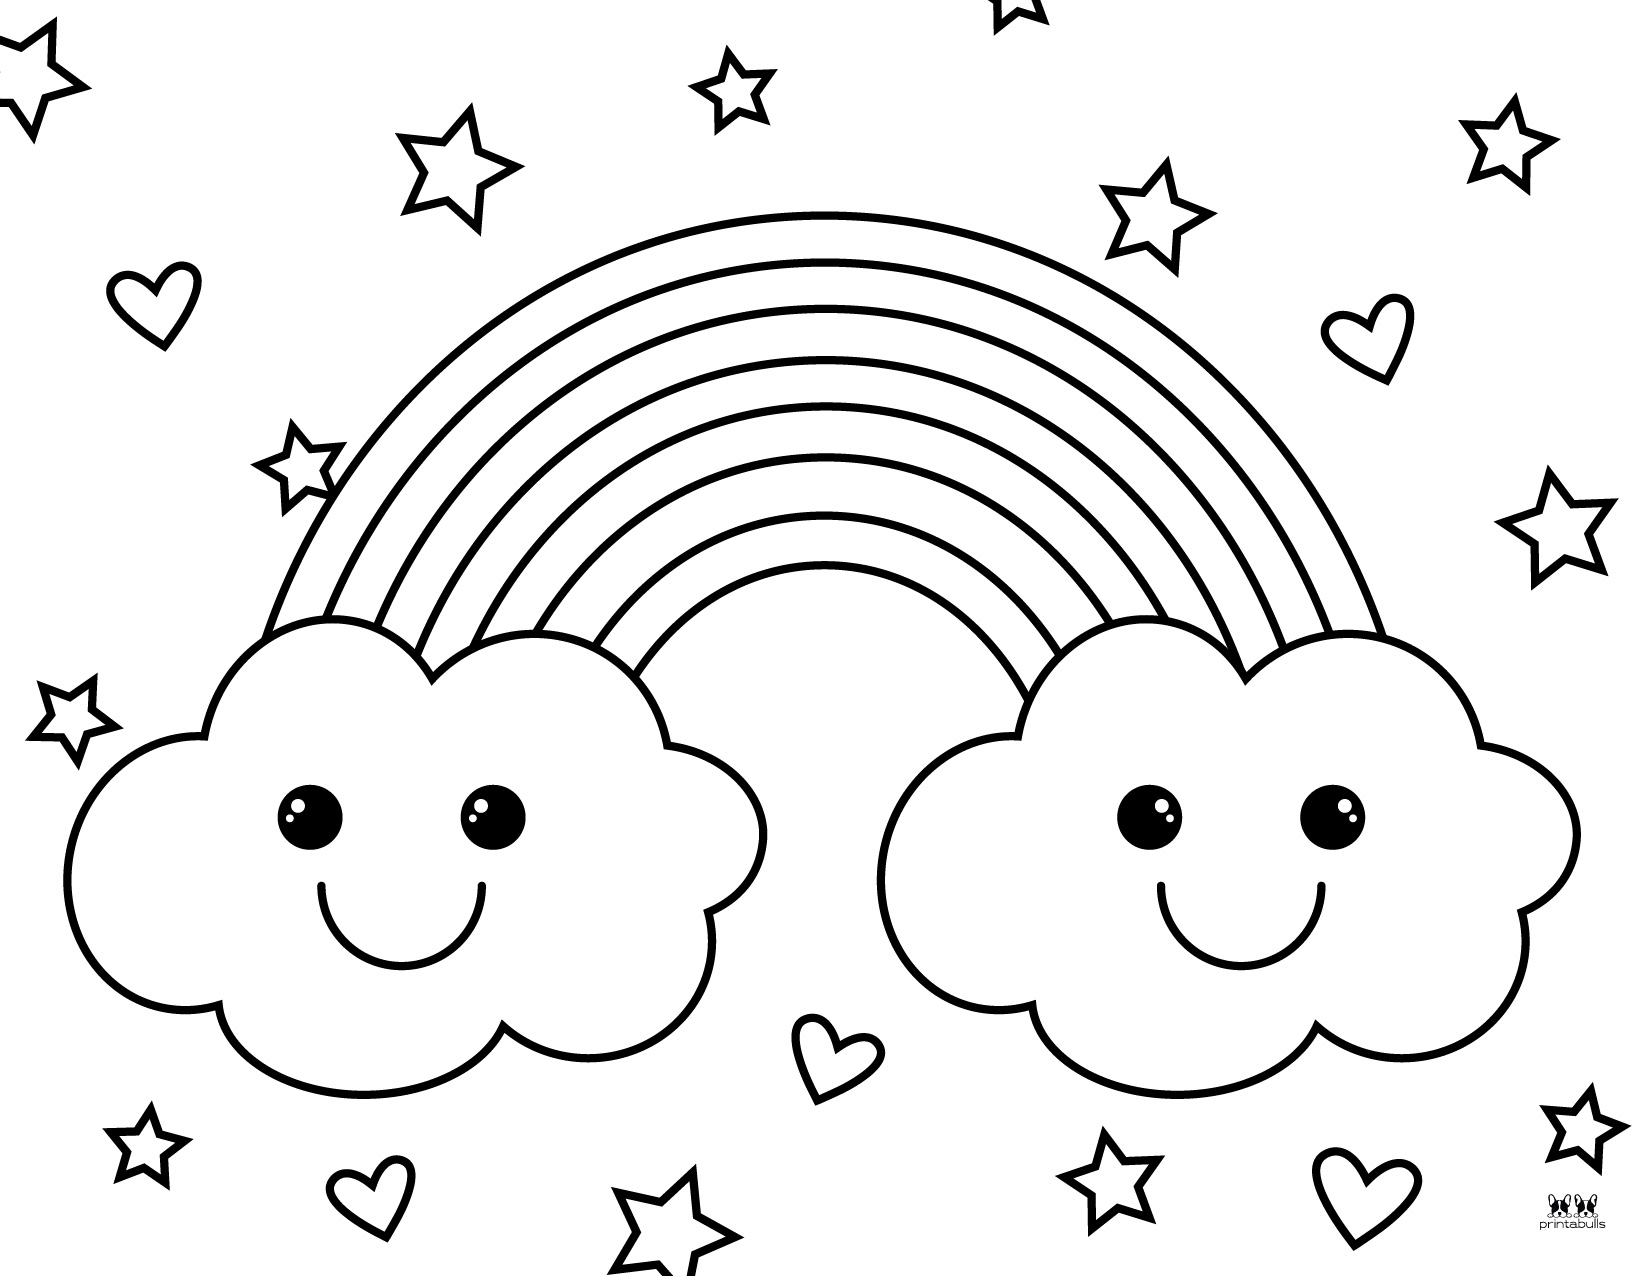 Rainbow Coloring Pages - 50 FREE Printable Pages | Printabulls